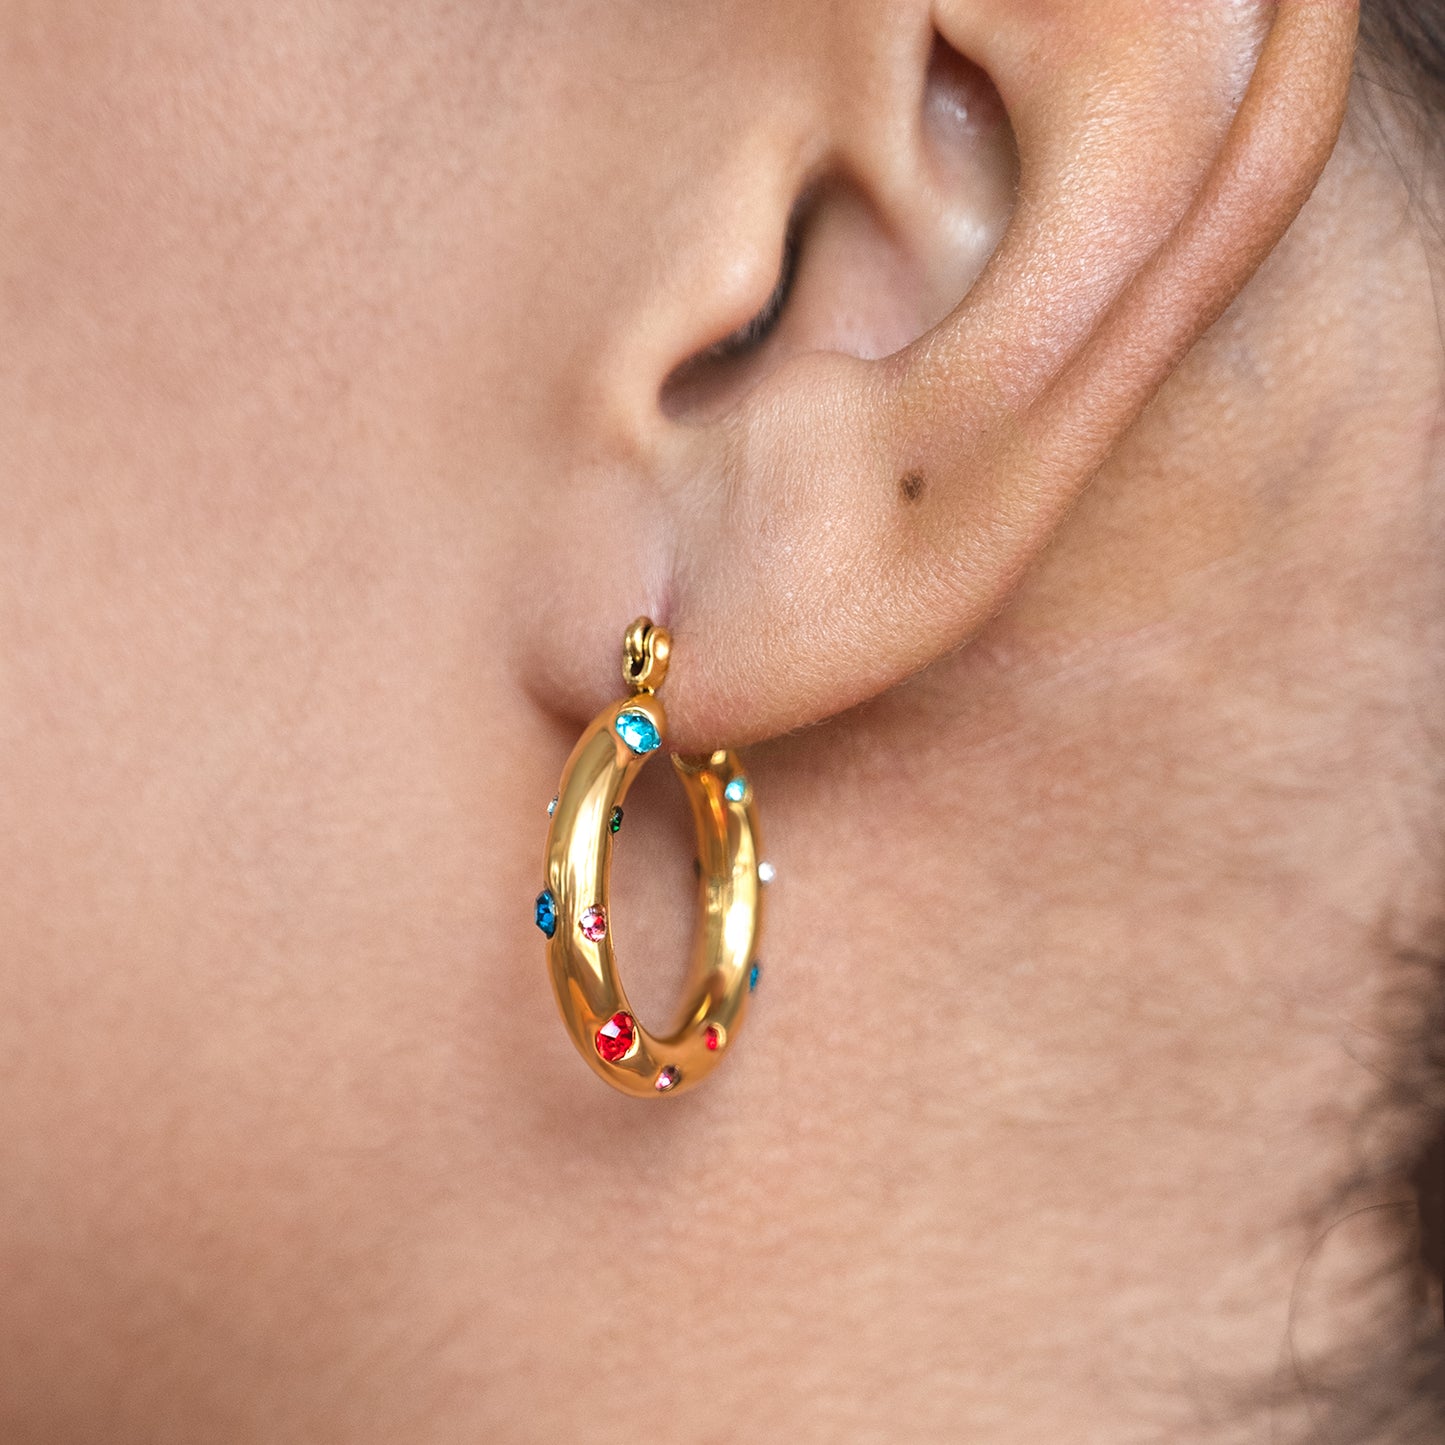 Dotted Colourful Gem Hoops Non Tarnish shown worn in a model's ear